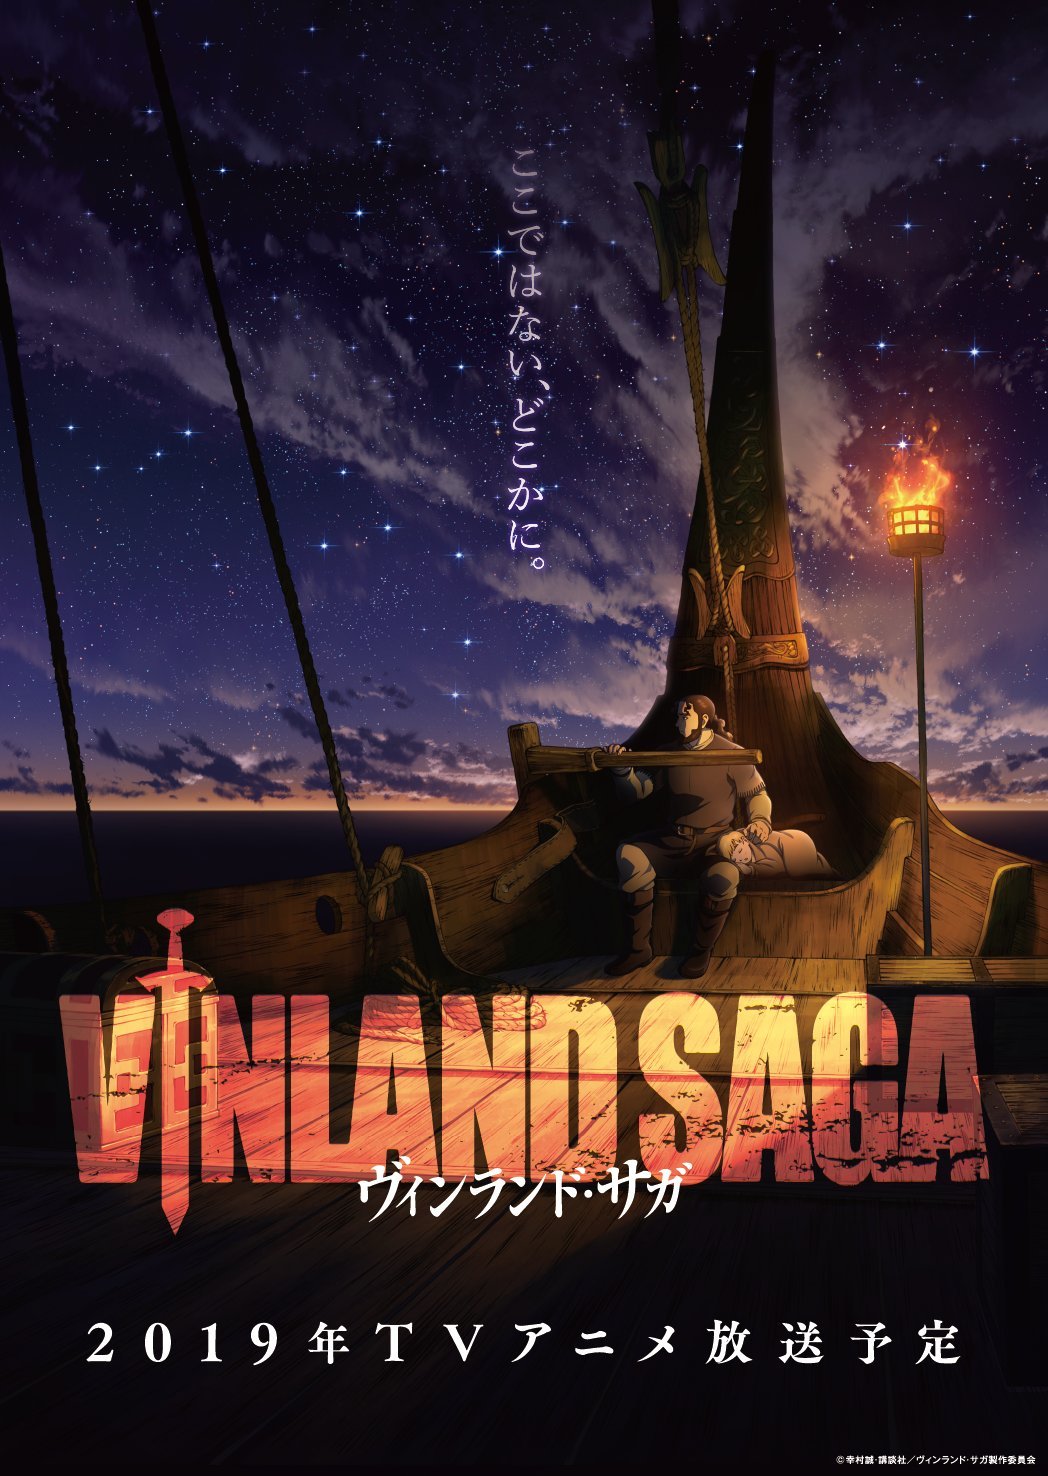 A PV for the upcoming TV anime âVinland Sagaâ is now currently streaming. The first cast members for the new series have also been revealed. Broadcast begins 2019. -Synopsis-â âThorfinn, son of one of the Vikingsâ greatest warriors, is among the...